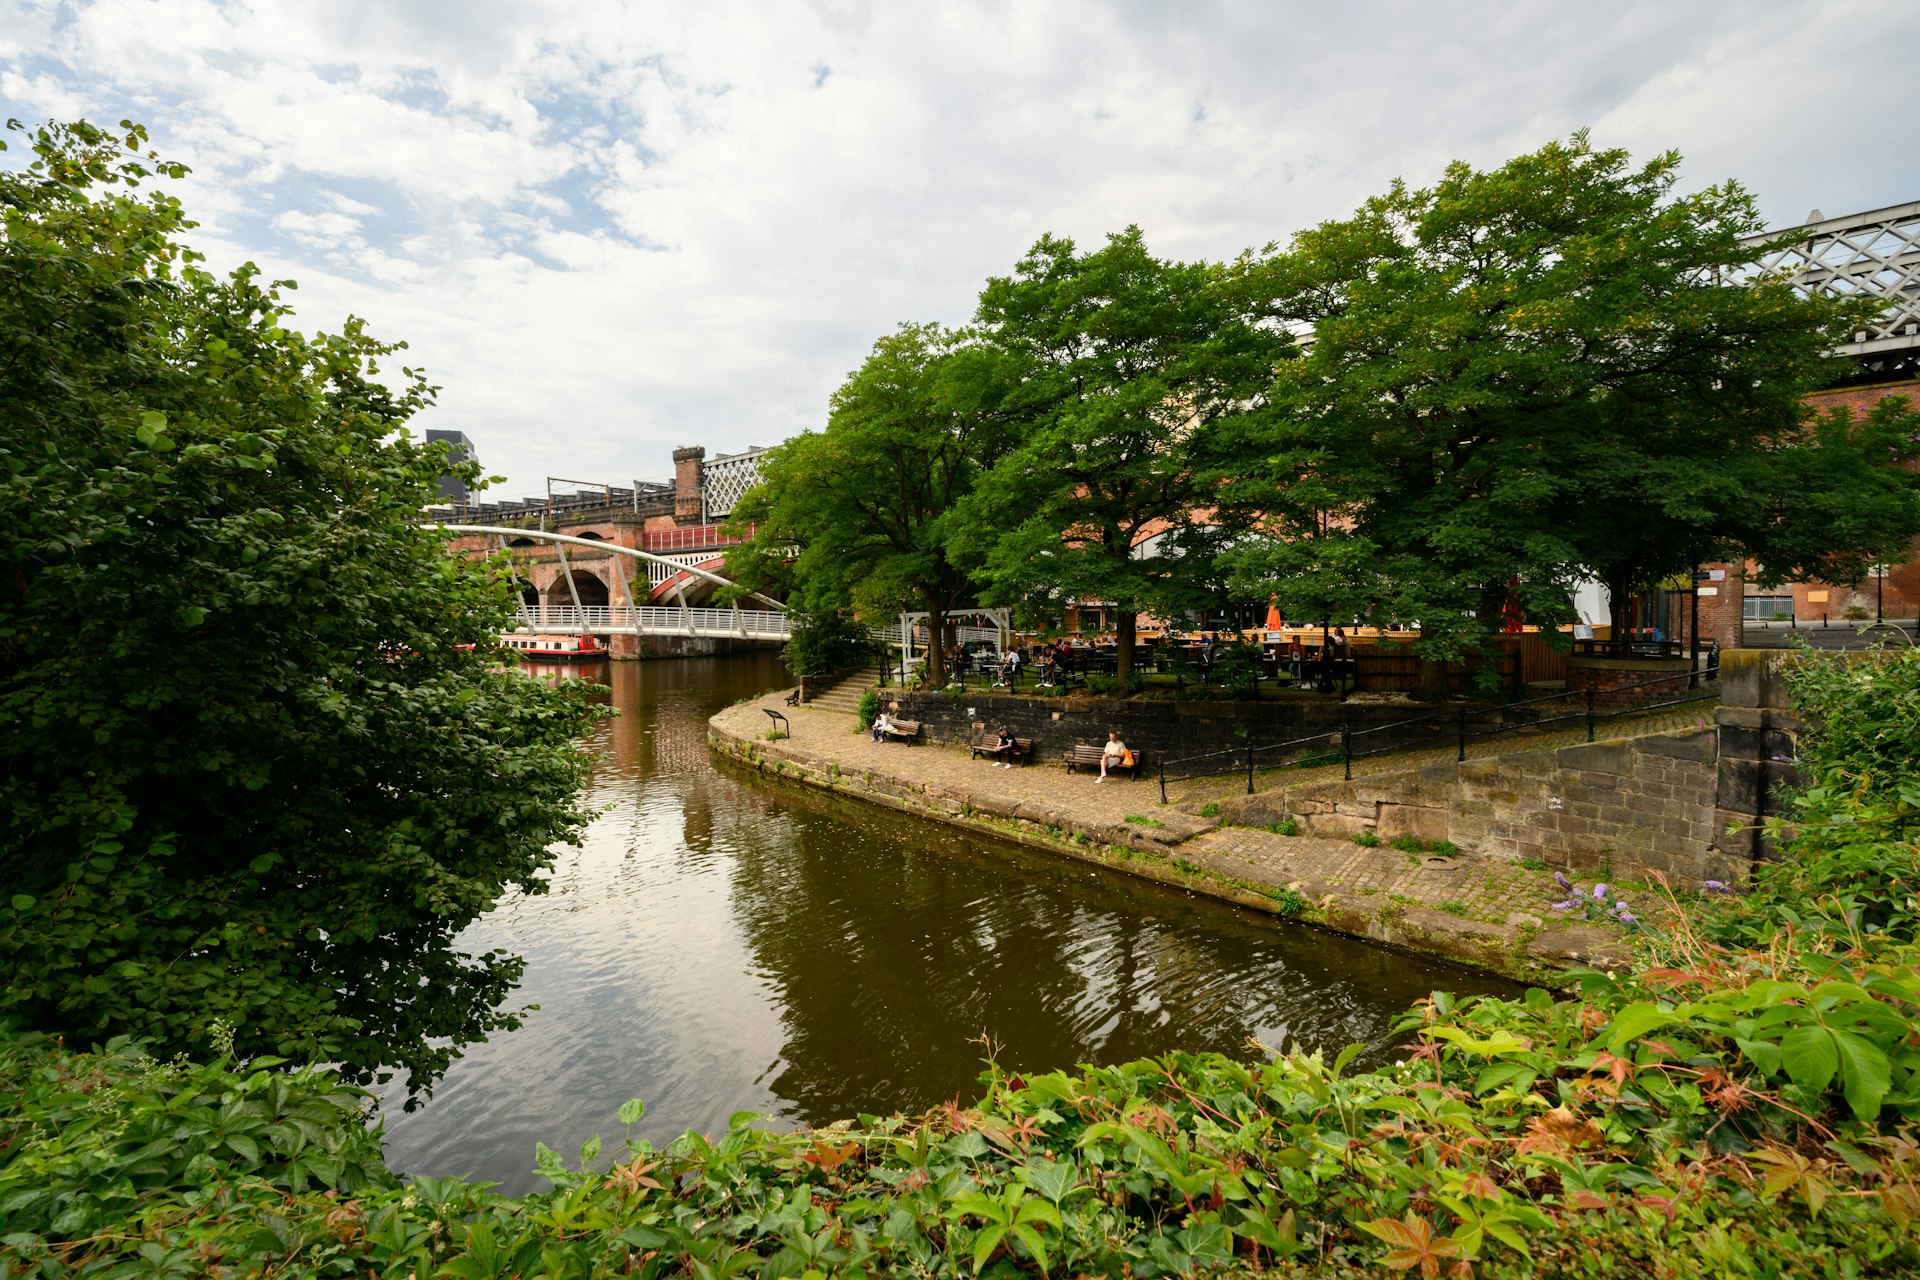 People sitting on benches lining a waterway in Castlefield, Manchester, England